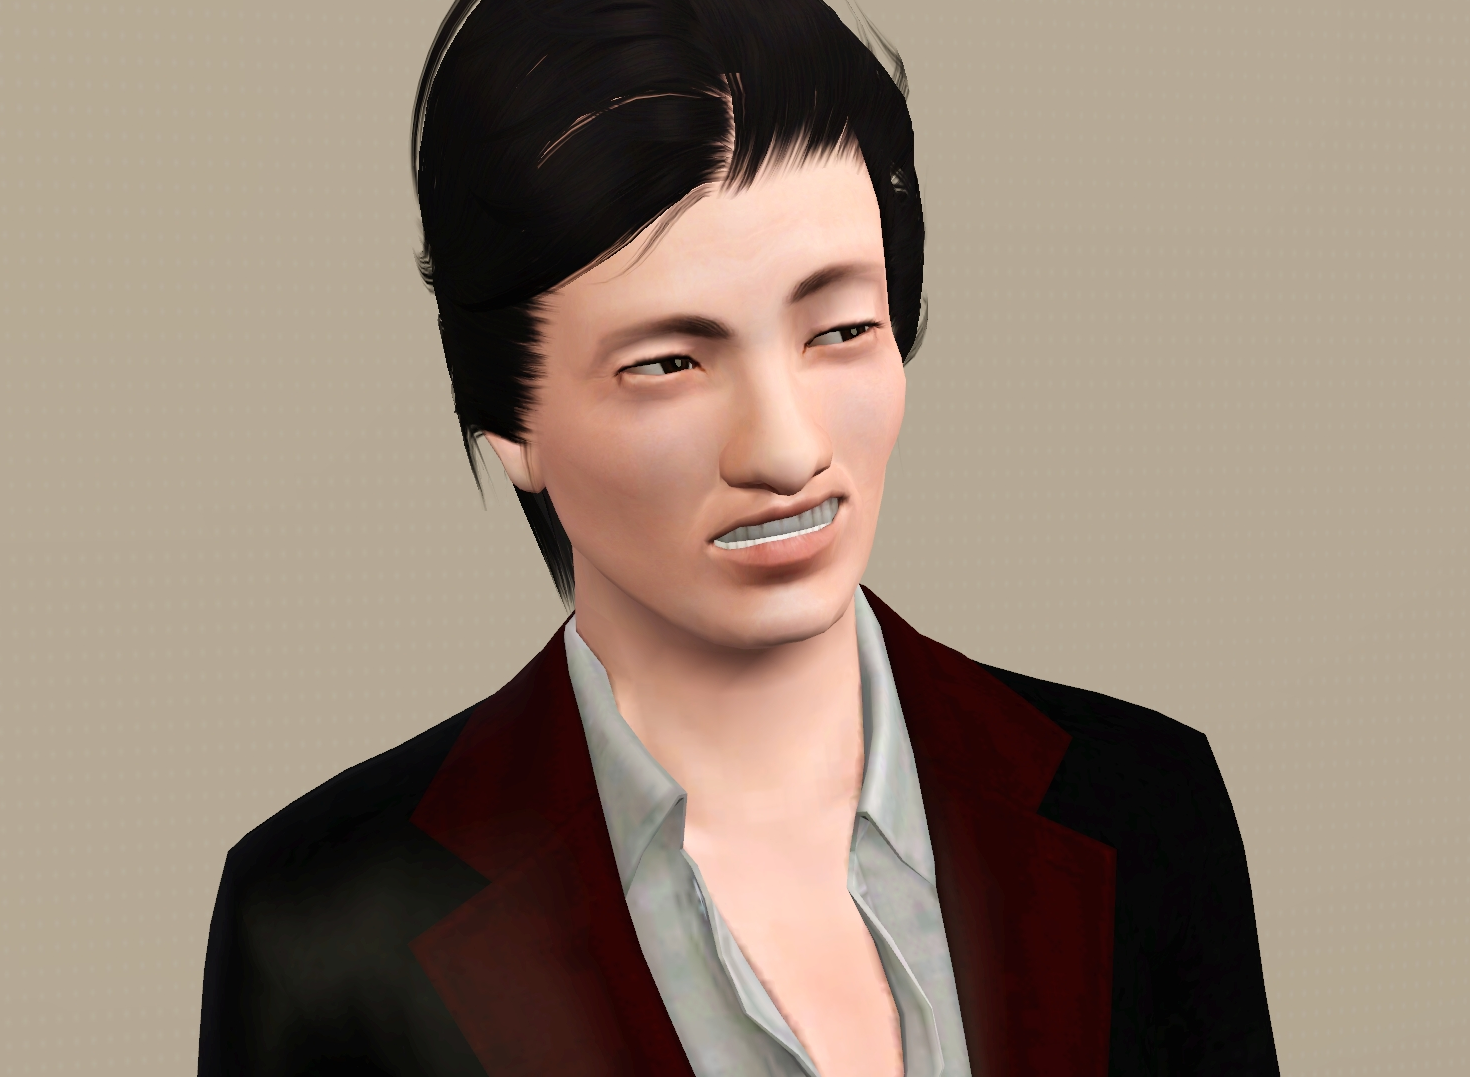 Roo's Sims: Hiro and Aisling Ikeda